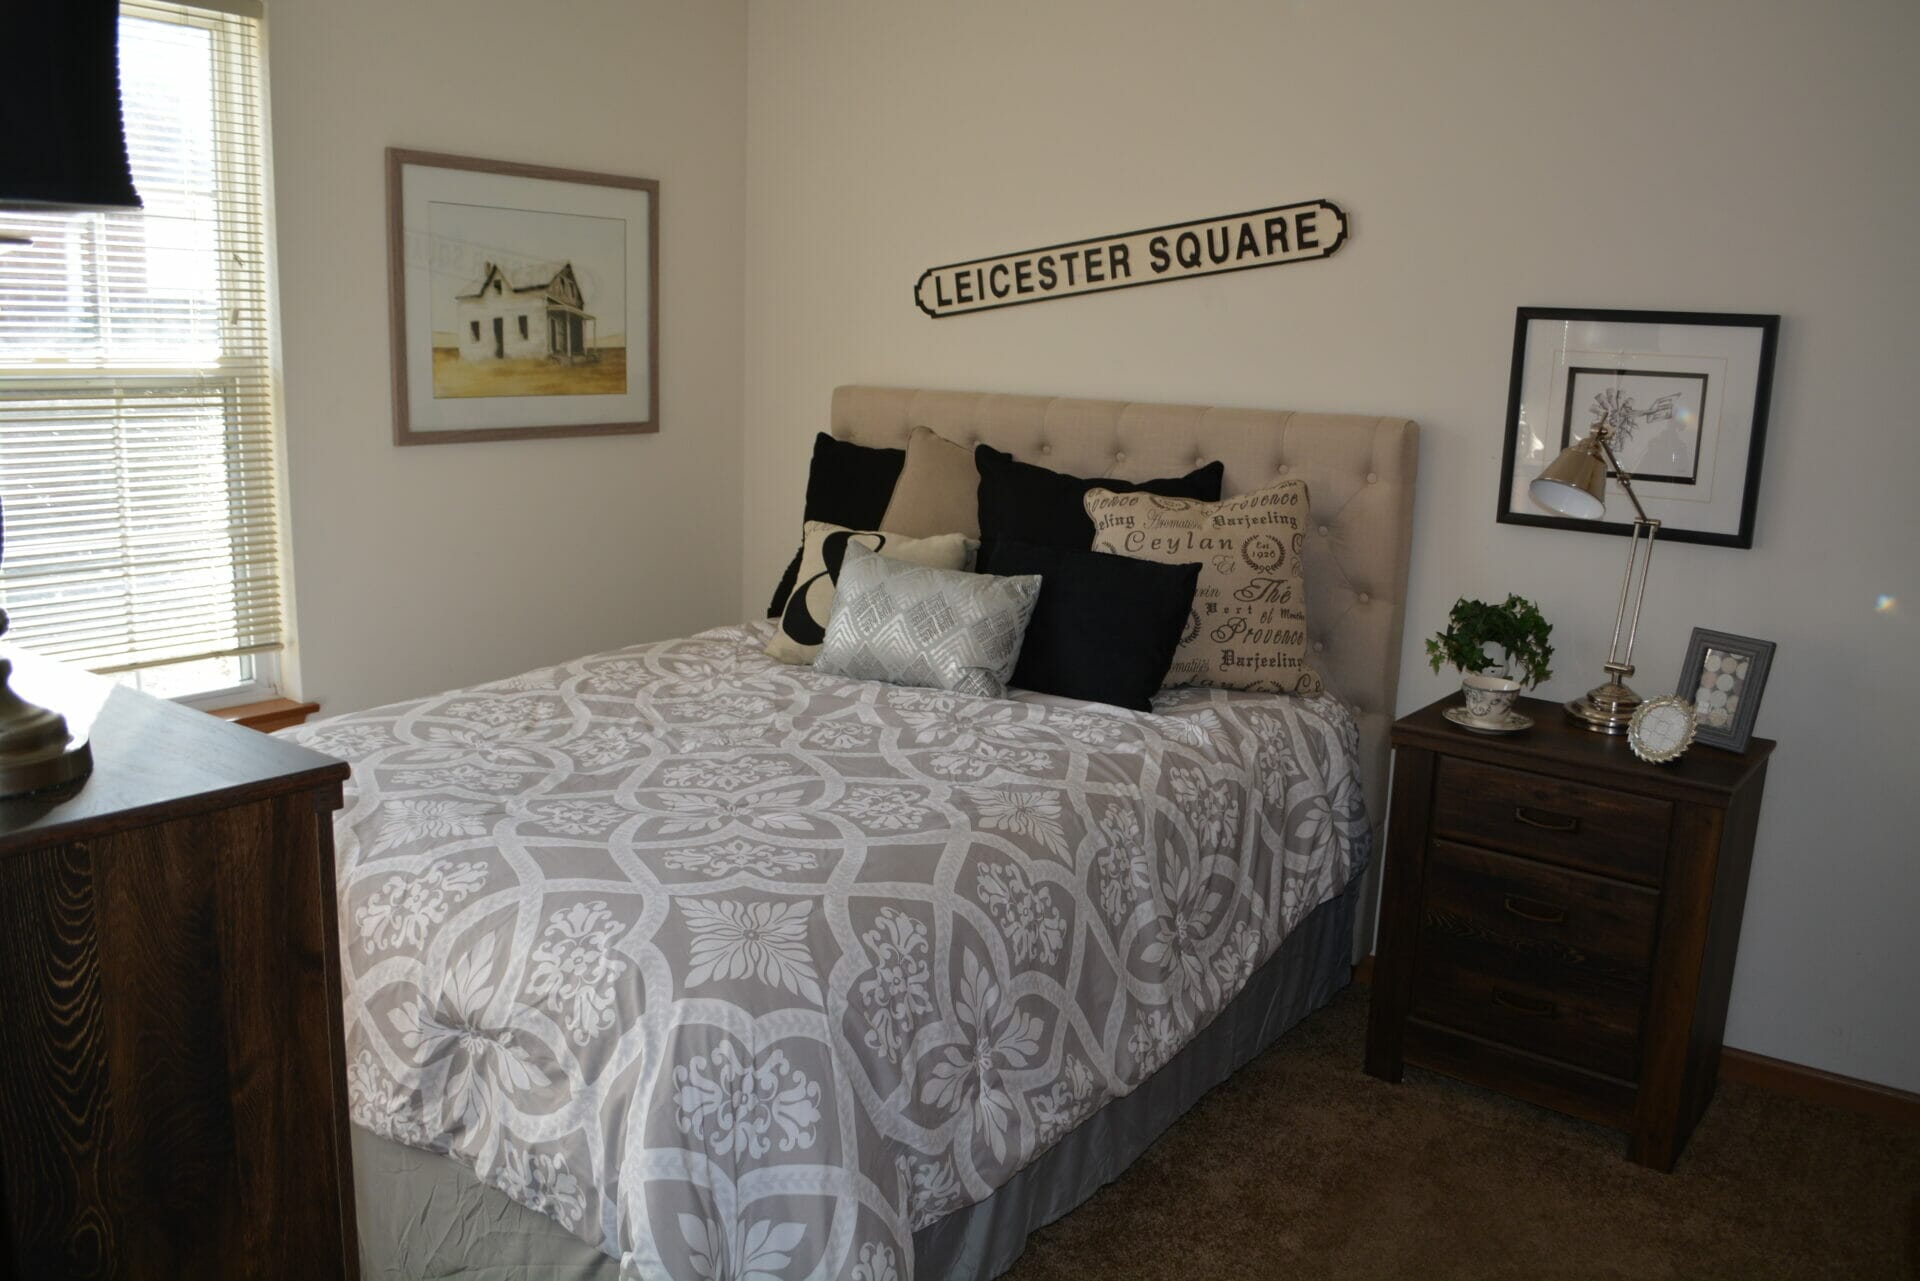 <span  class="uc_style_uc_tiles_grid_image_elementor_uc_items_attribute_title" style="color:#000000;">Rosegate Assisted Living bedroom apartment</span>